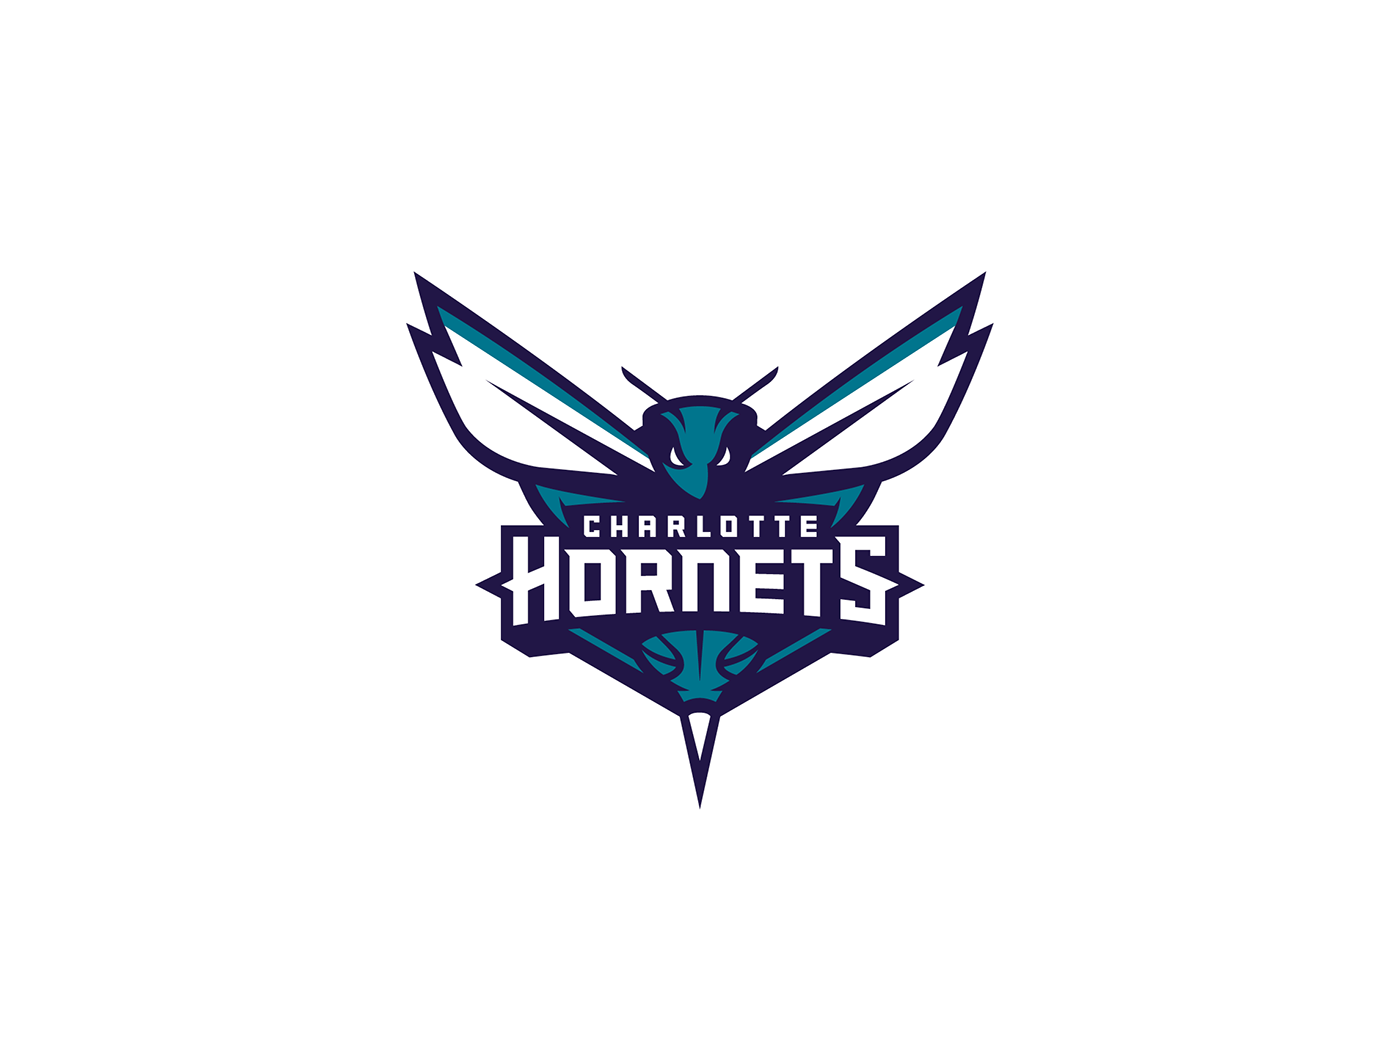 In 2014U201315, The Hornets Name Returns To The Nba When Owner Michael Jordanu0027S Charlotte Bobcats Adopt The Moniker Synonymous With Basketball In Charlotte. - Charlotte Hornets, Transparent background PNG HD thumbnail